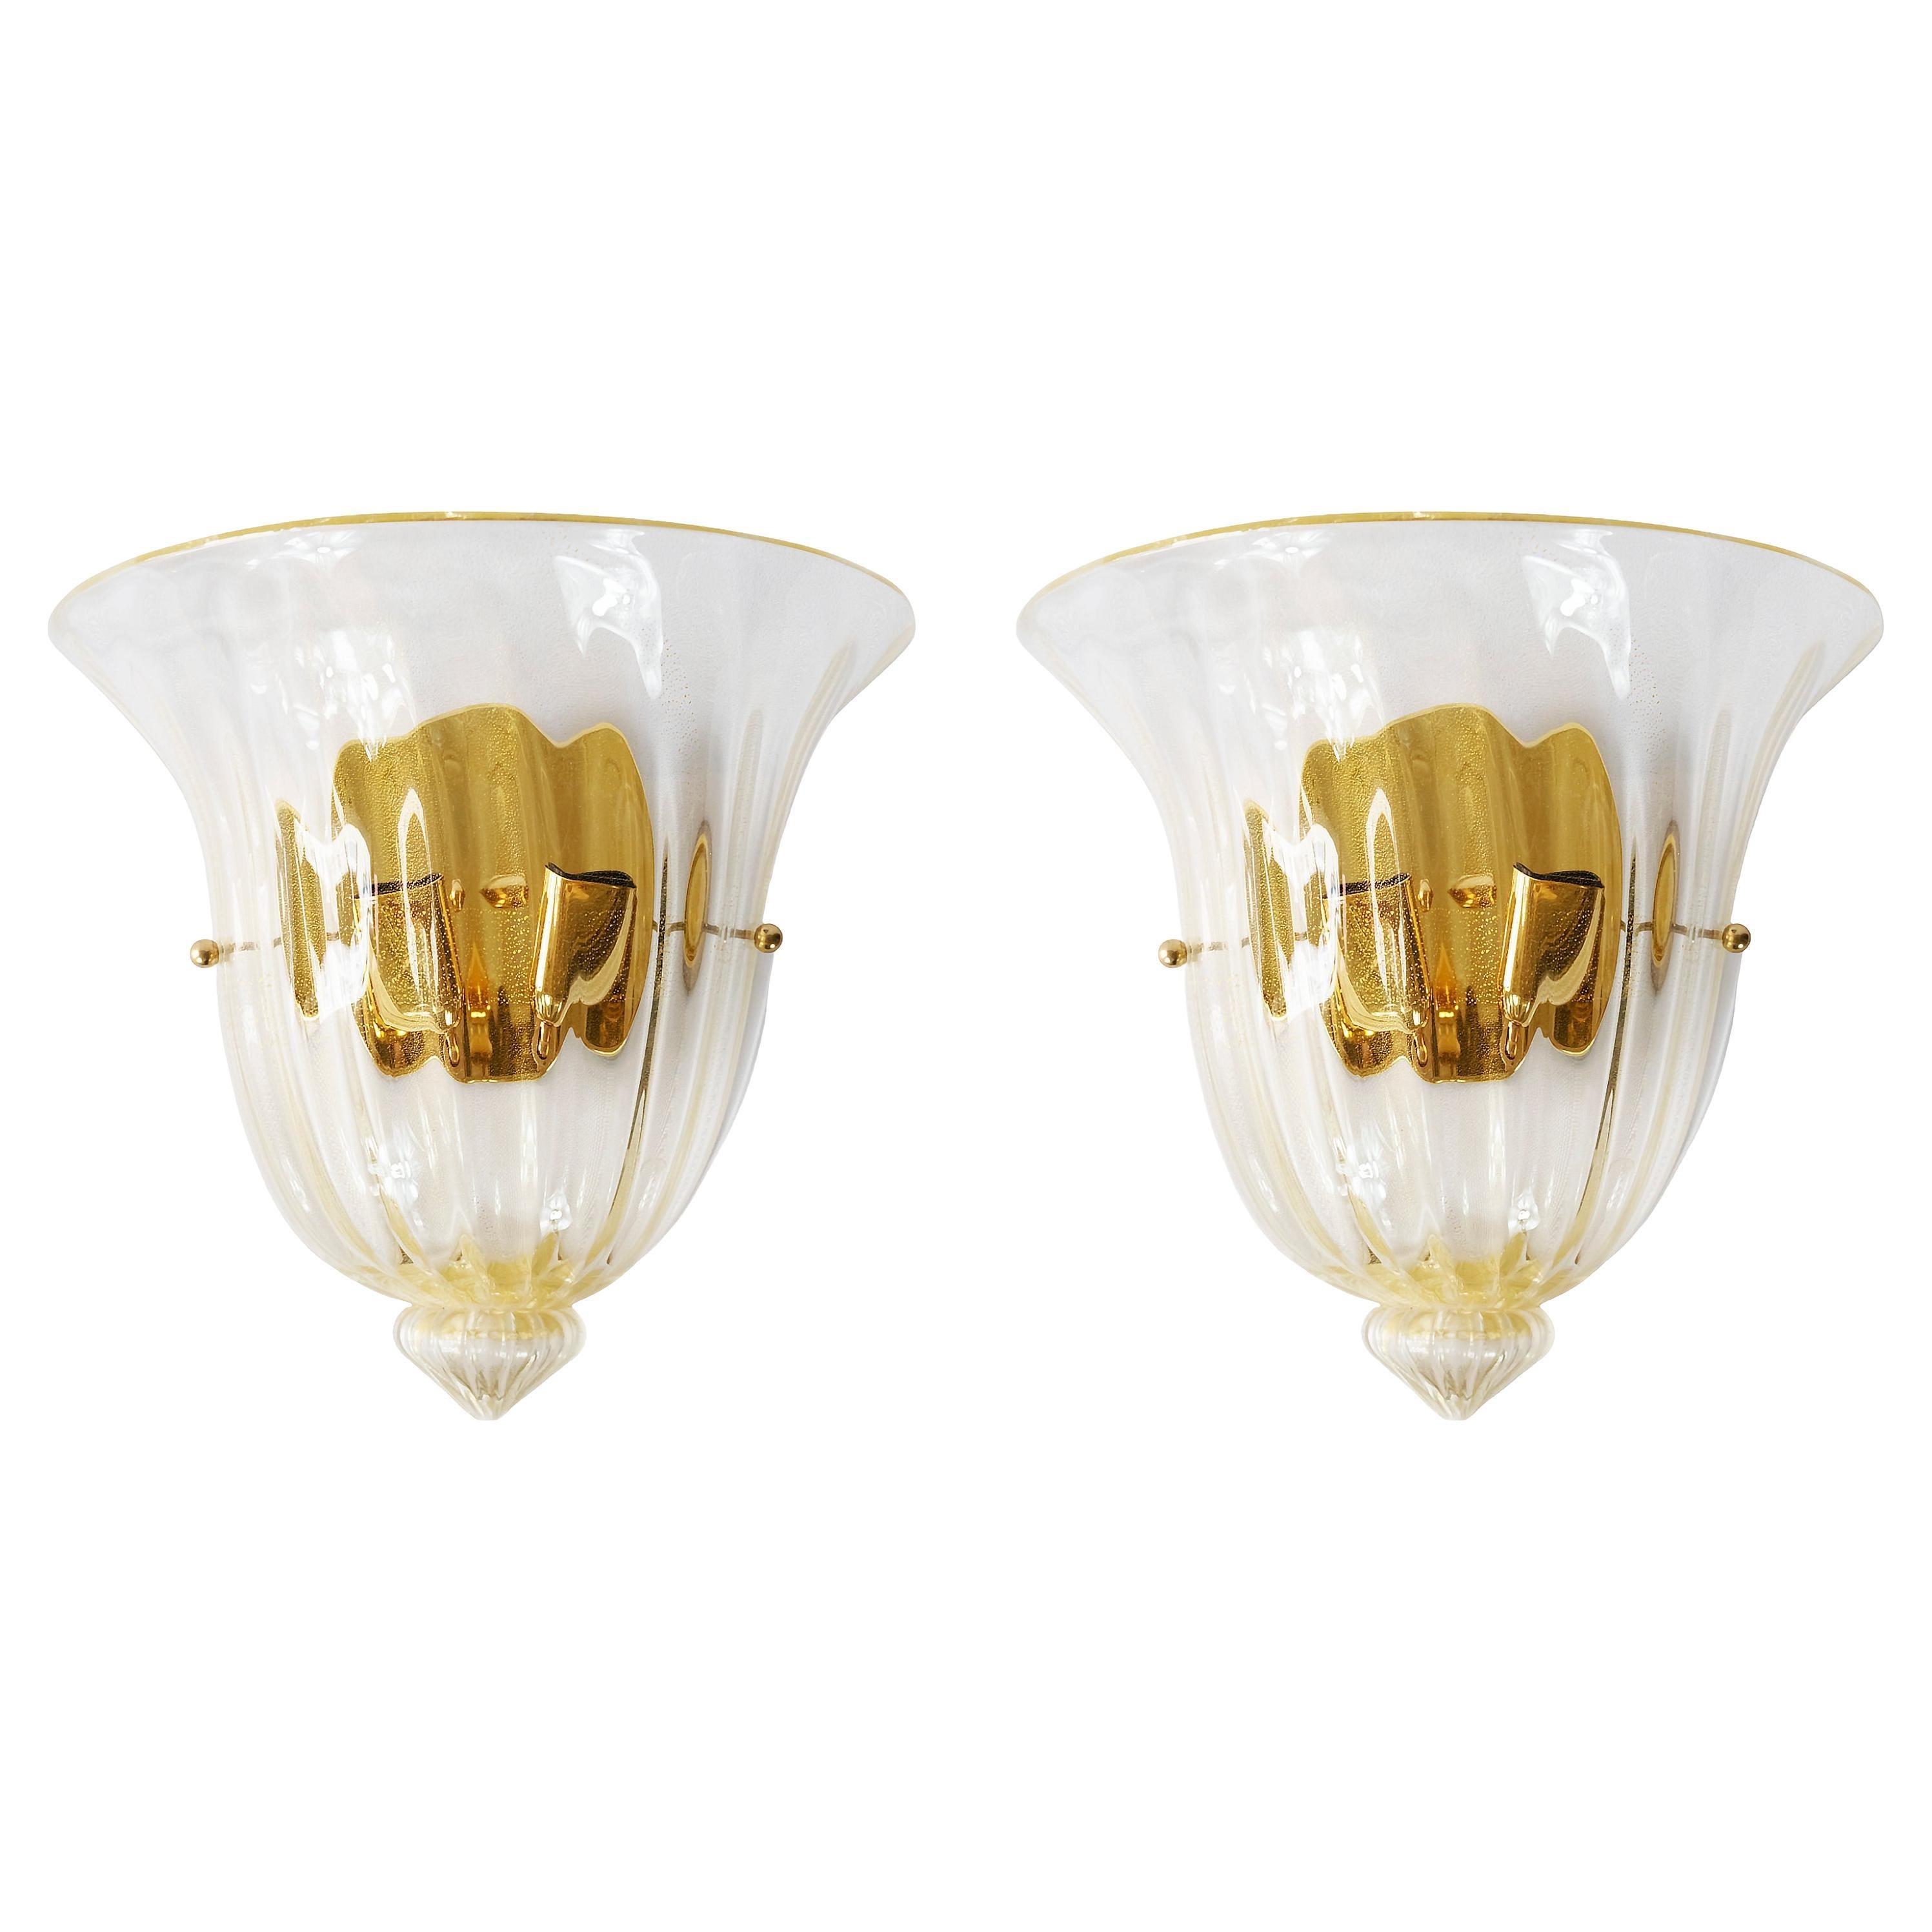 Pair of Italian Murano Glass and Brass Wall Light Sconces, circa 1970 For Sale